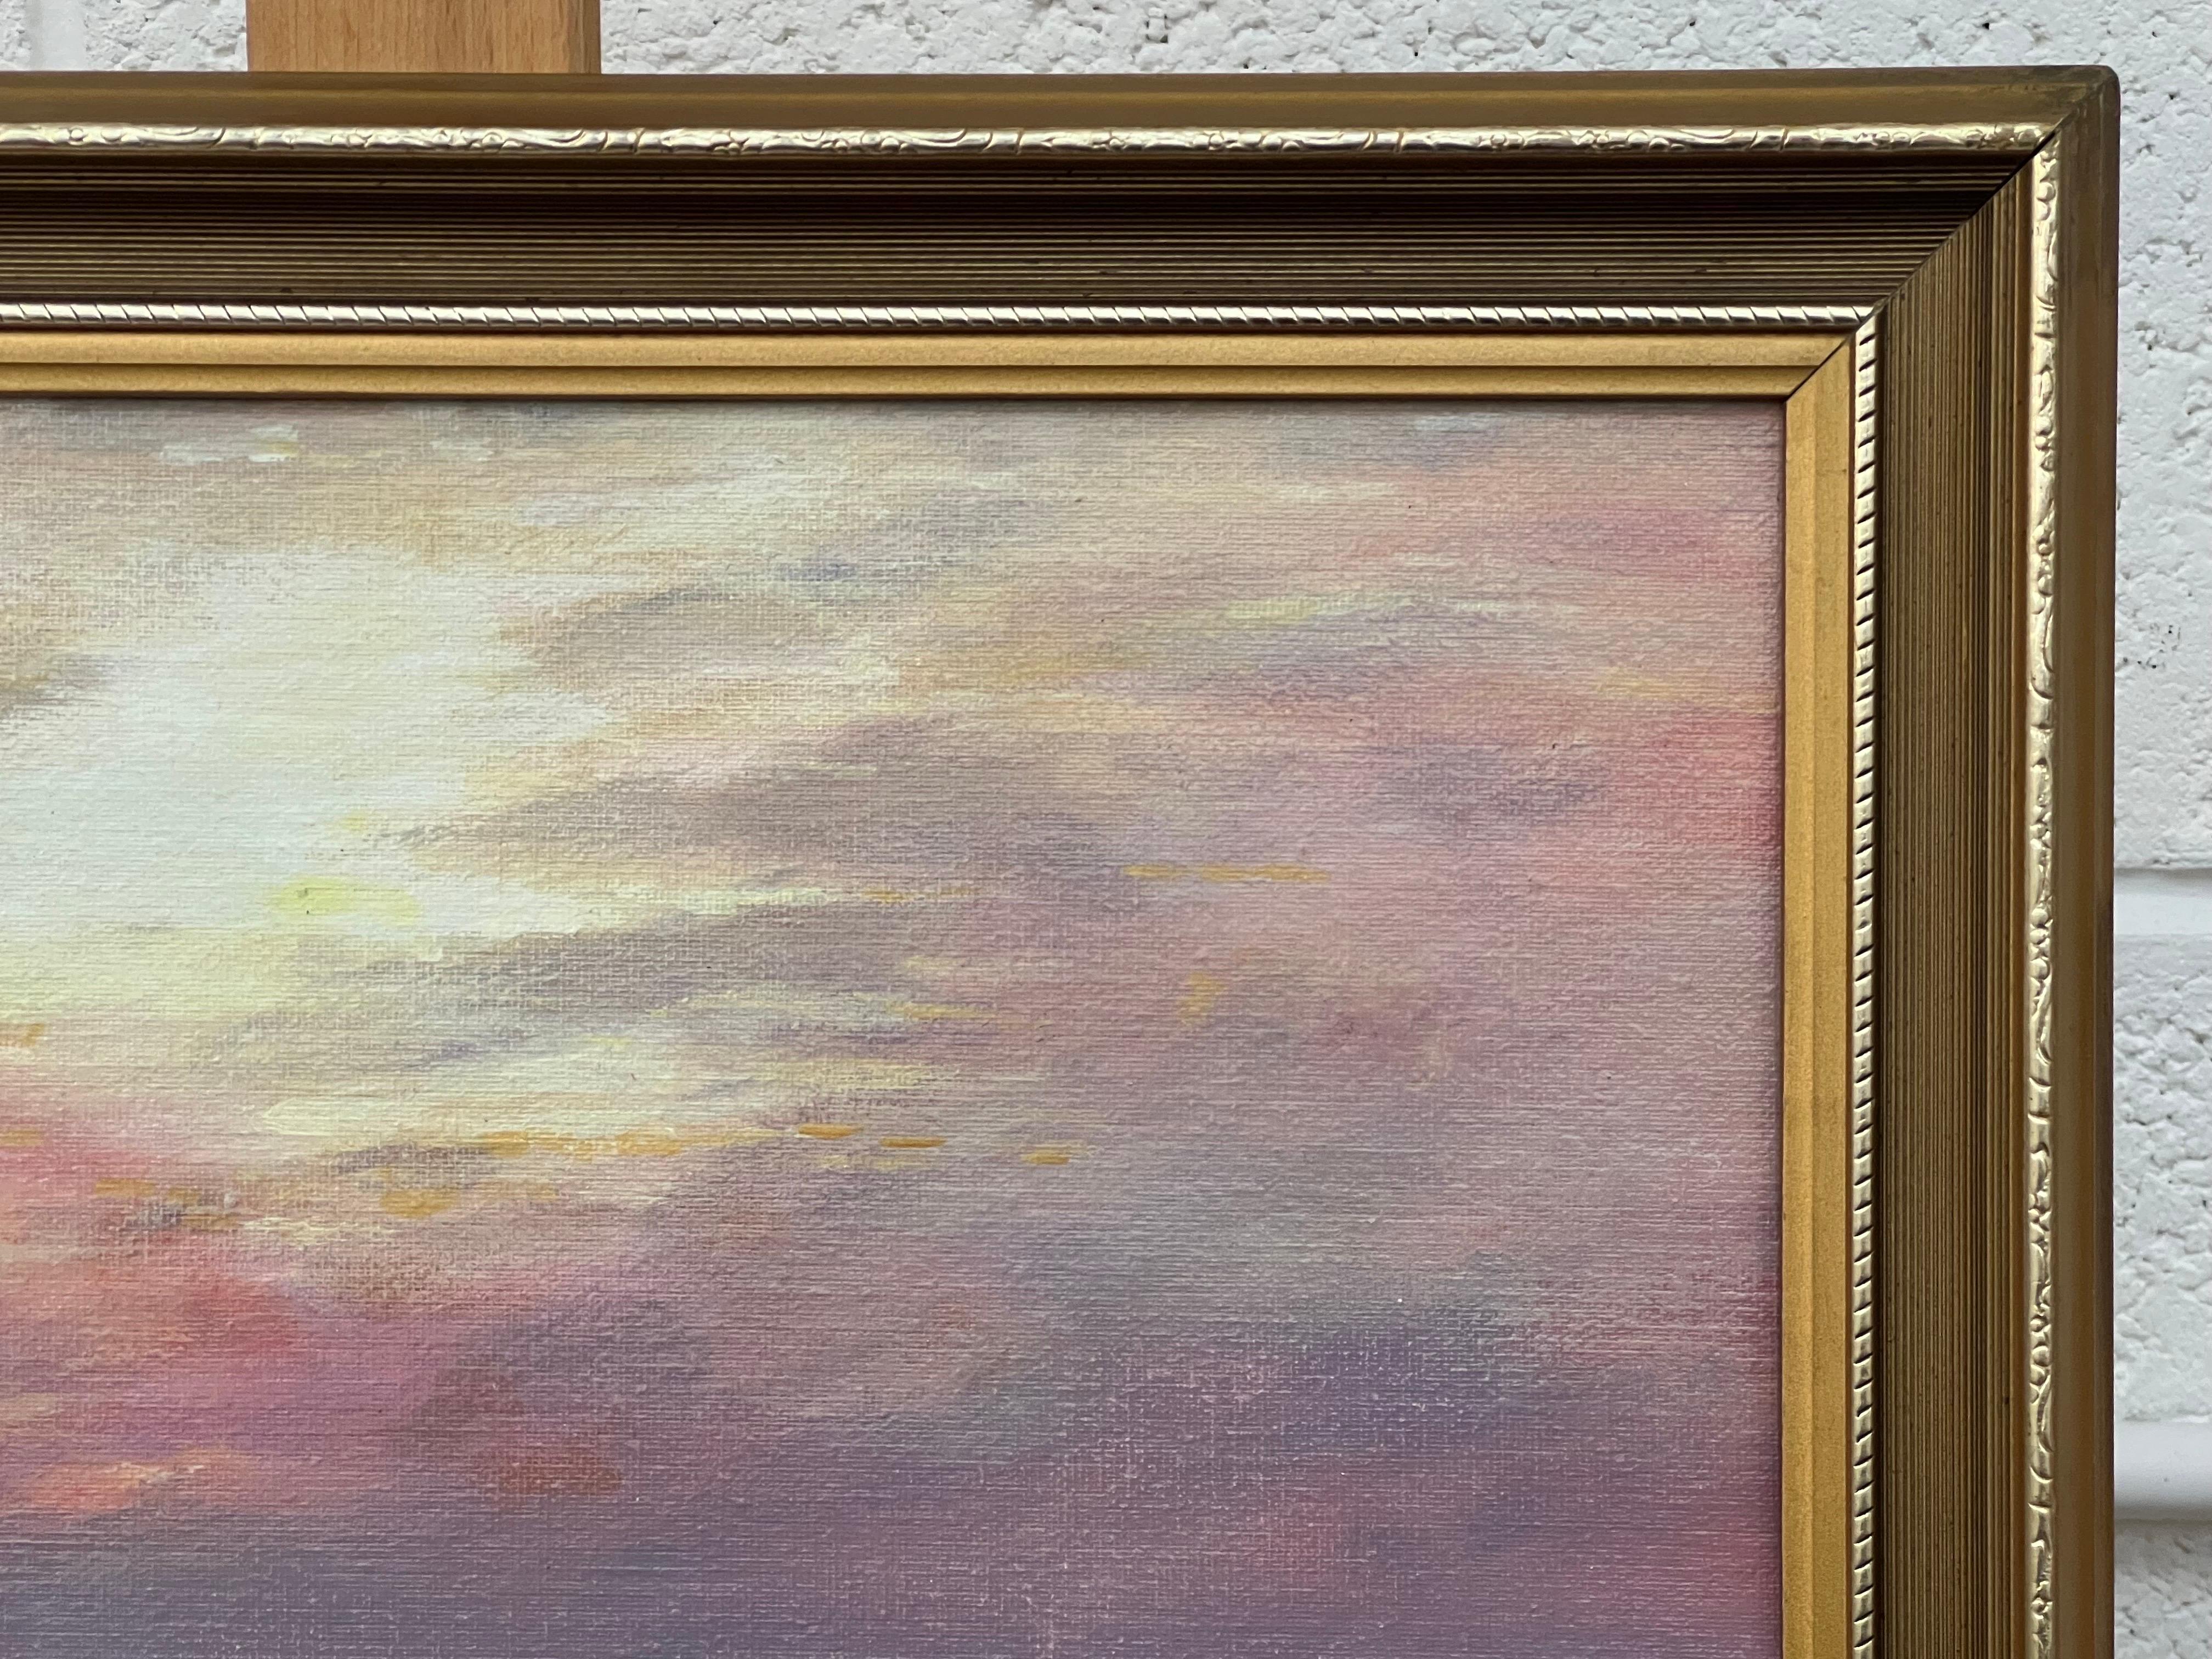 Dawn Seascape Painting with Pink Sky and Waves by 20th Century British Artist For Sale 4